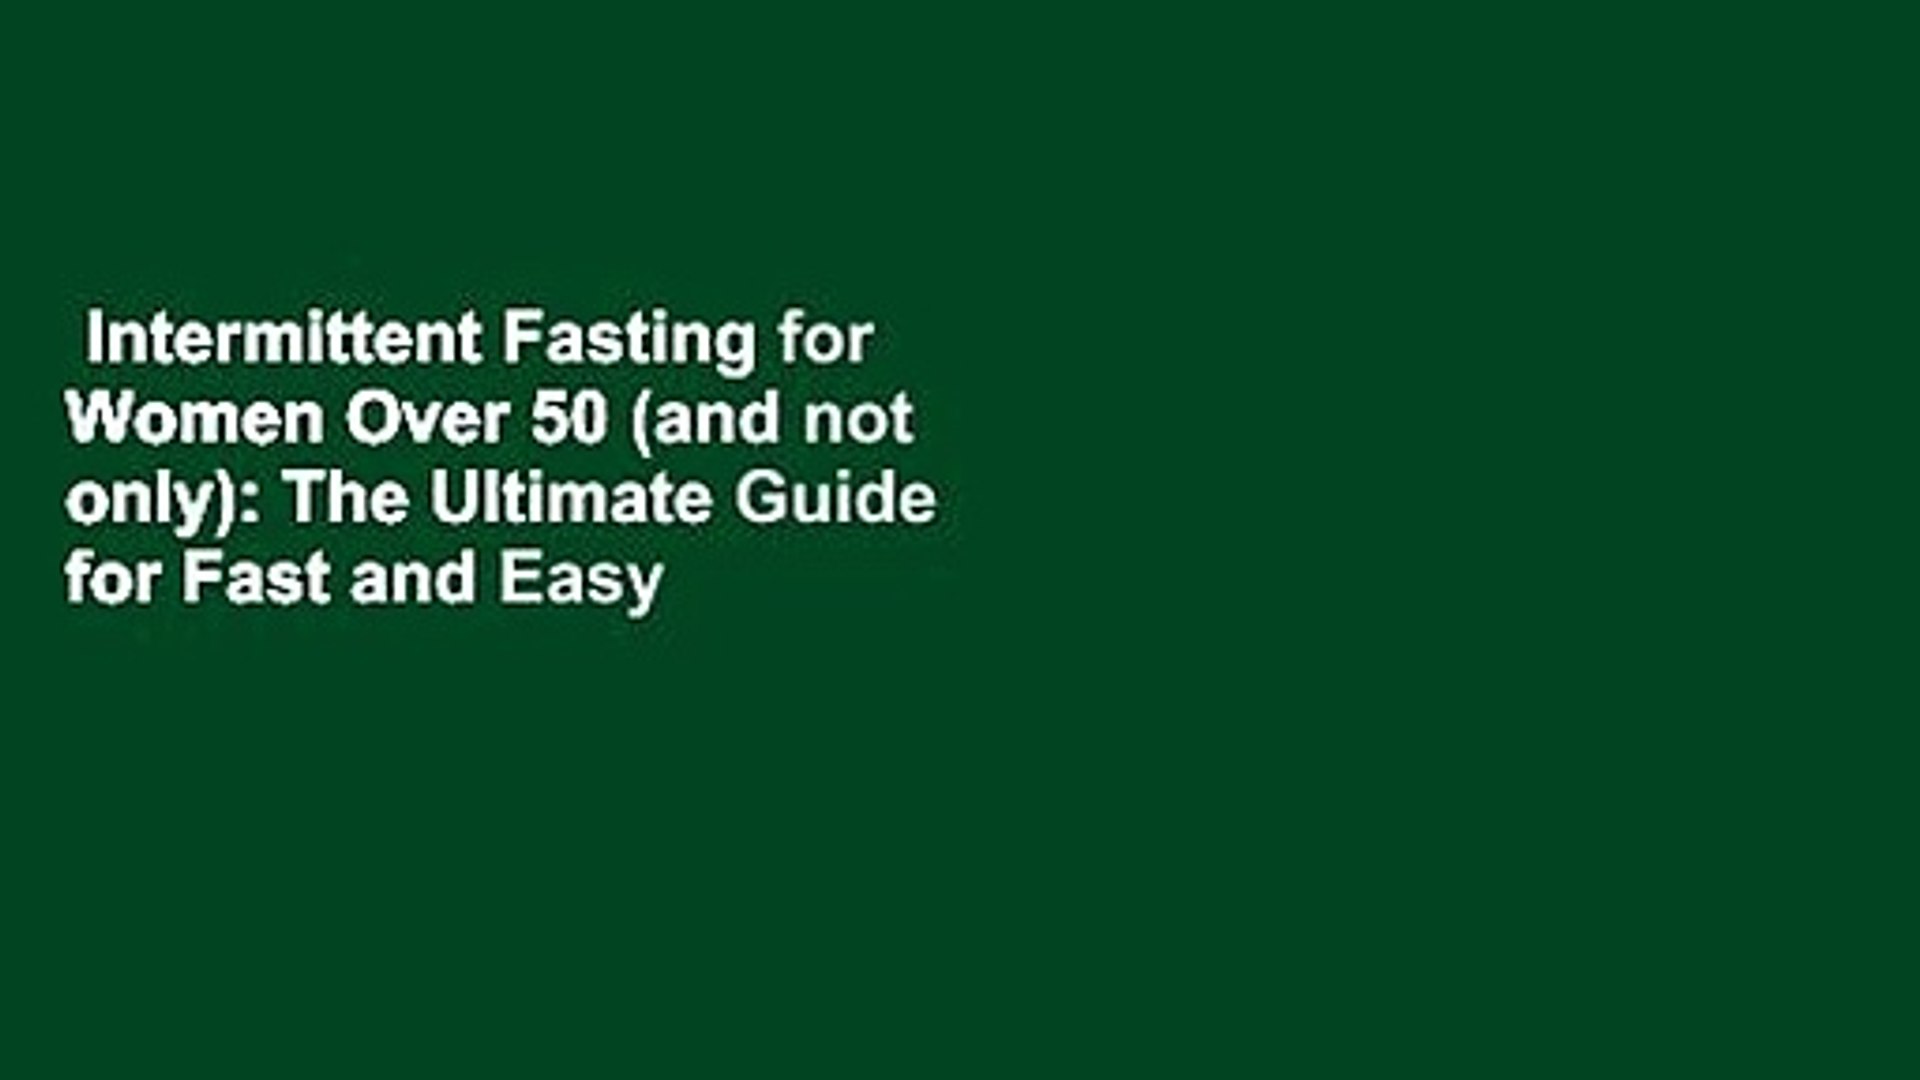 Intermittent Fasting for Women Over 50 (and not only): The Ultimate Guide for Fast and Easy